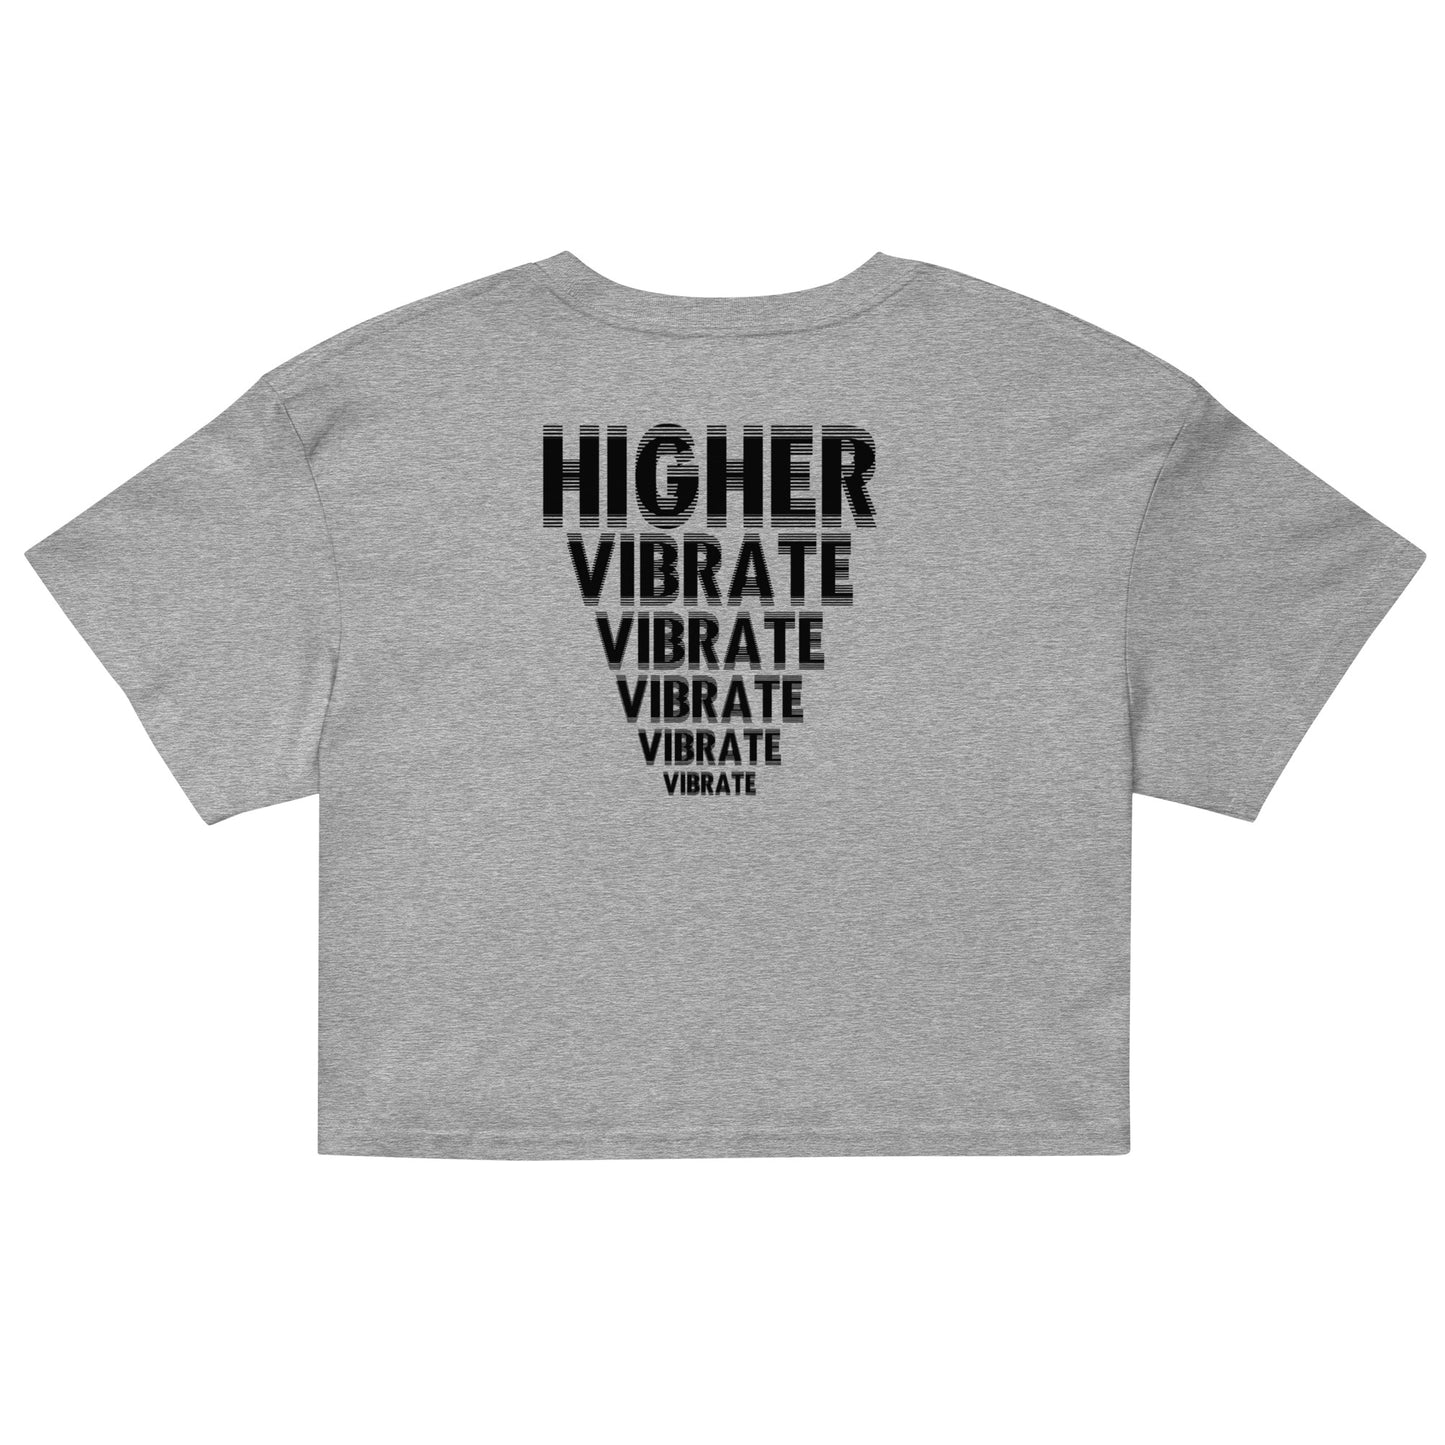 Vibrate Higher crop top - PROTECT YO ENERGY 